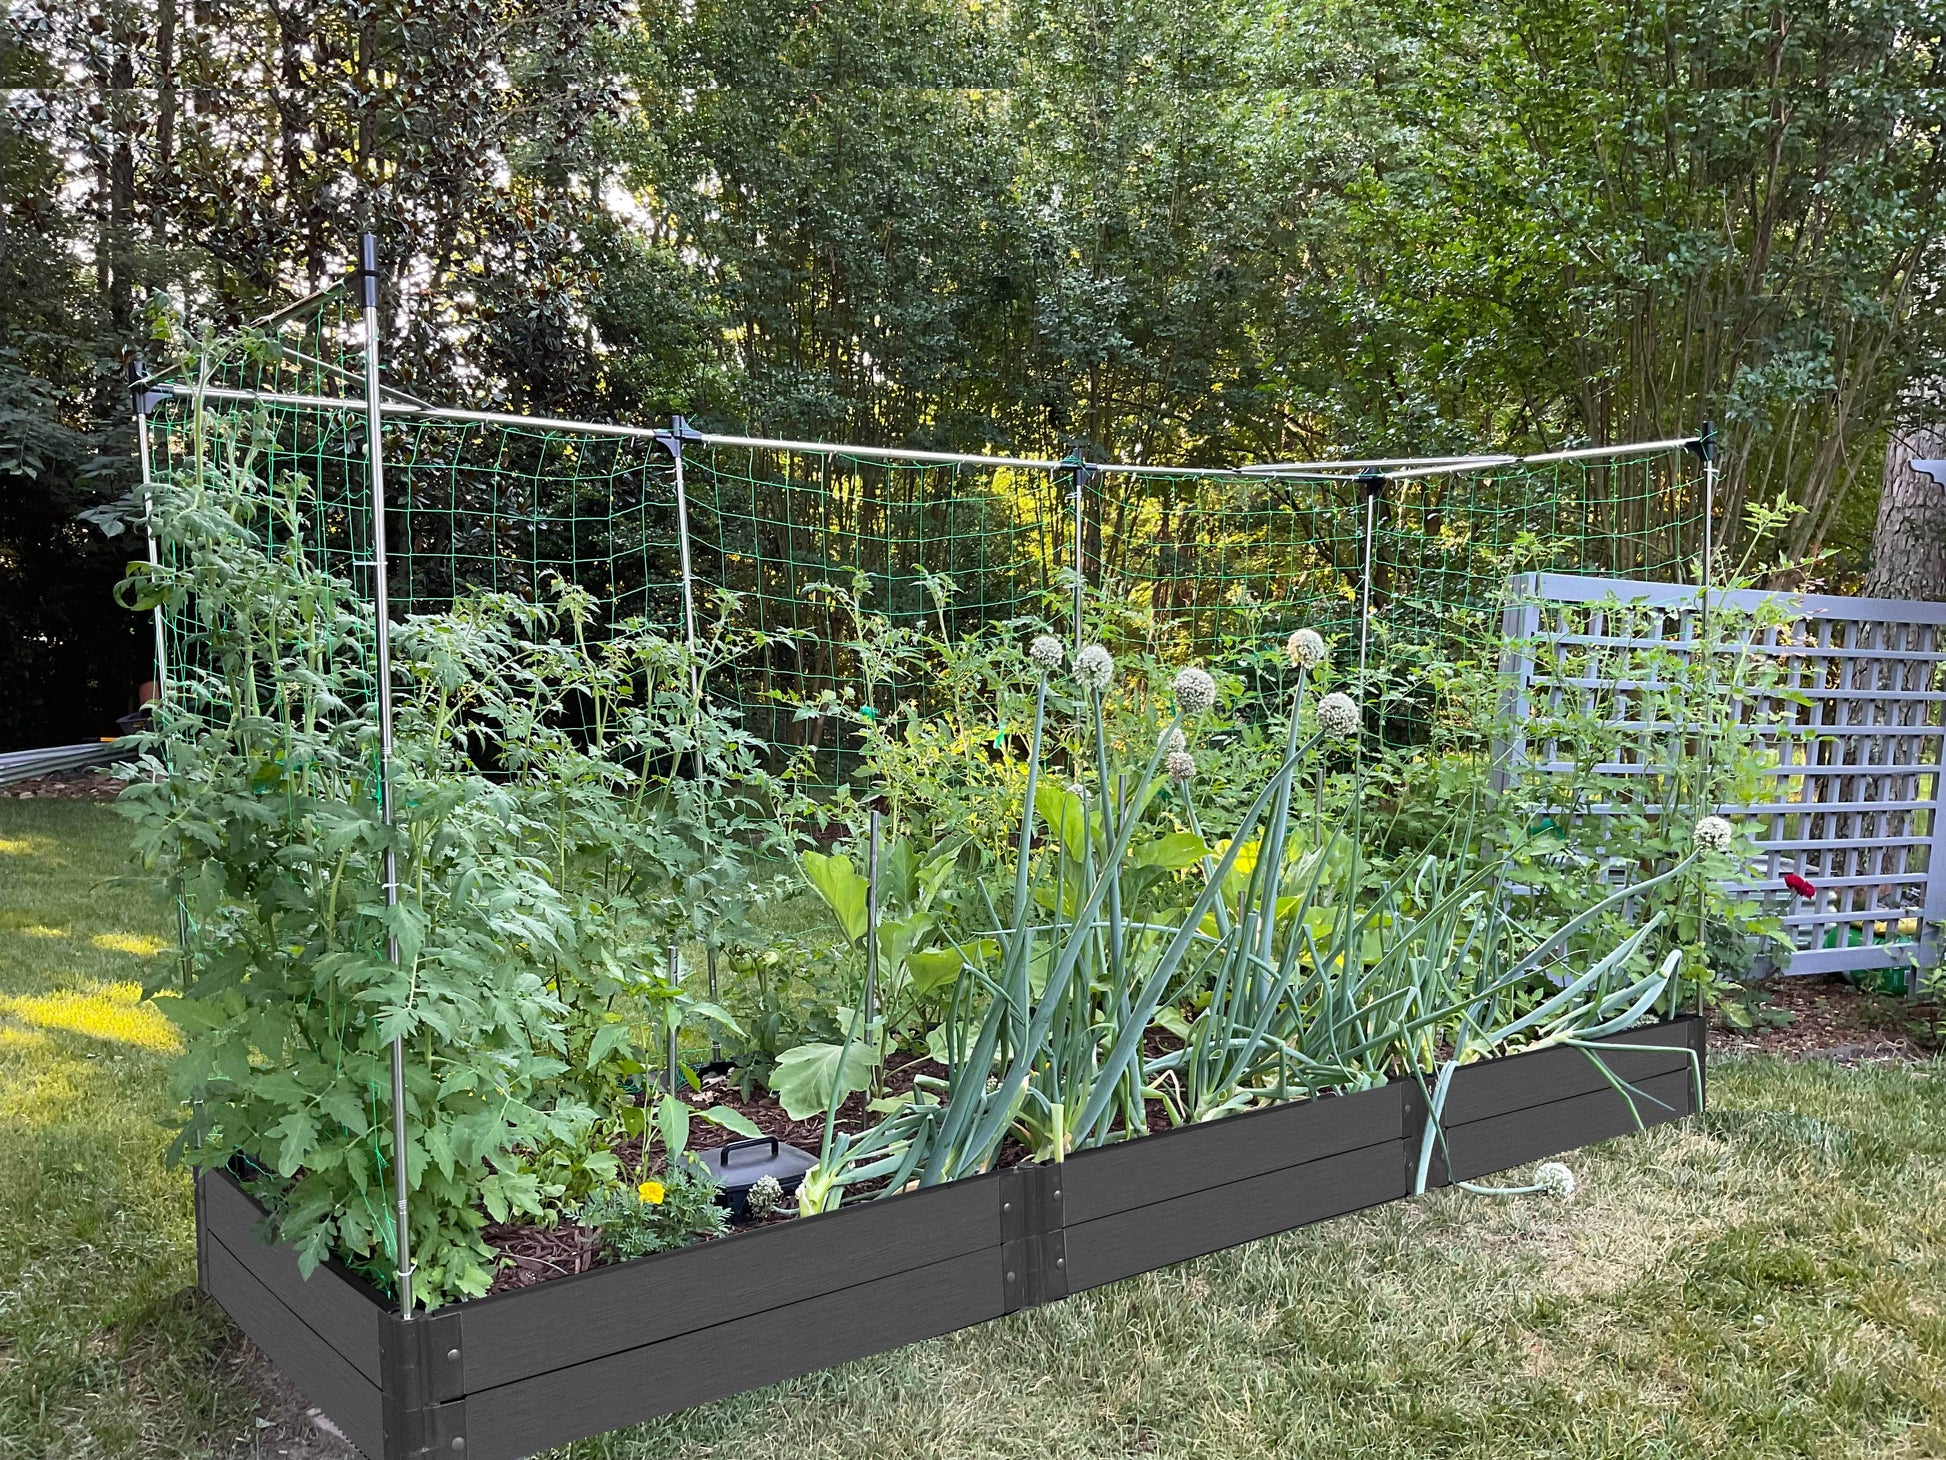 4' x 12' Raised Garden Bed with Trellis Raised Garden Beds Frame It All Weathered Wood 2" 2 = 11"